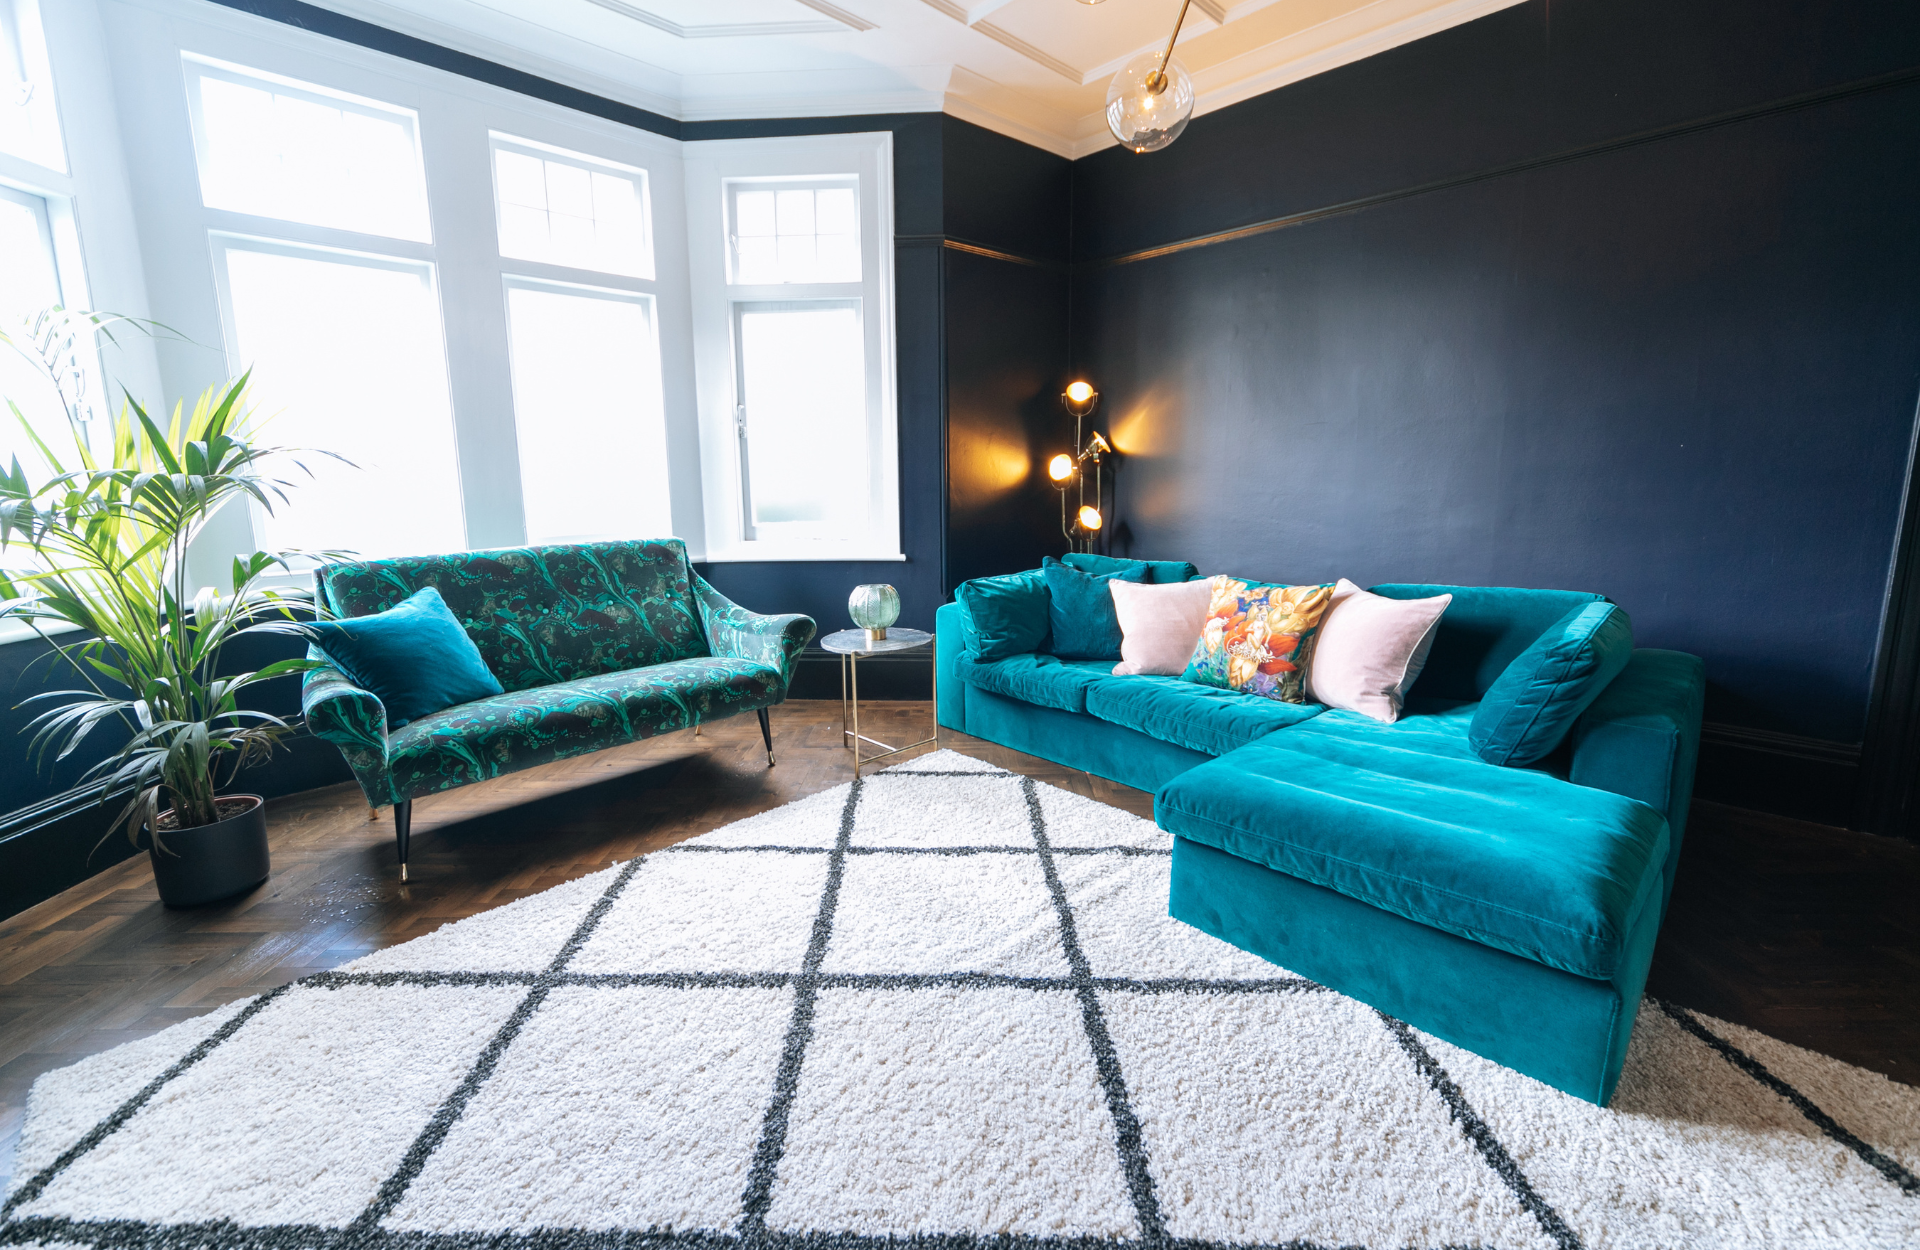 Living room with blue sofas and patterned rug 